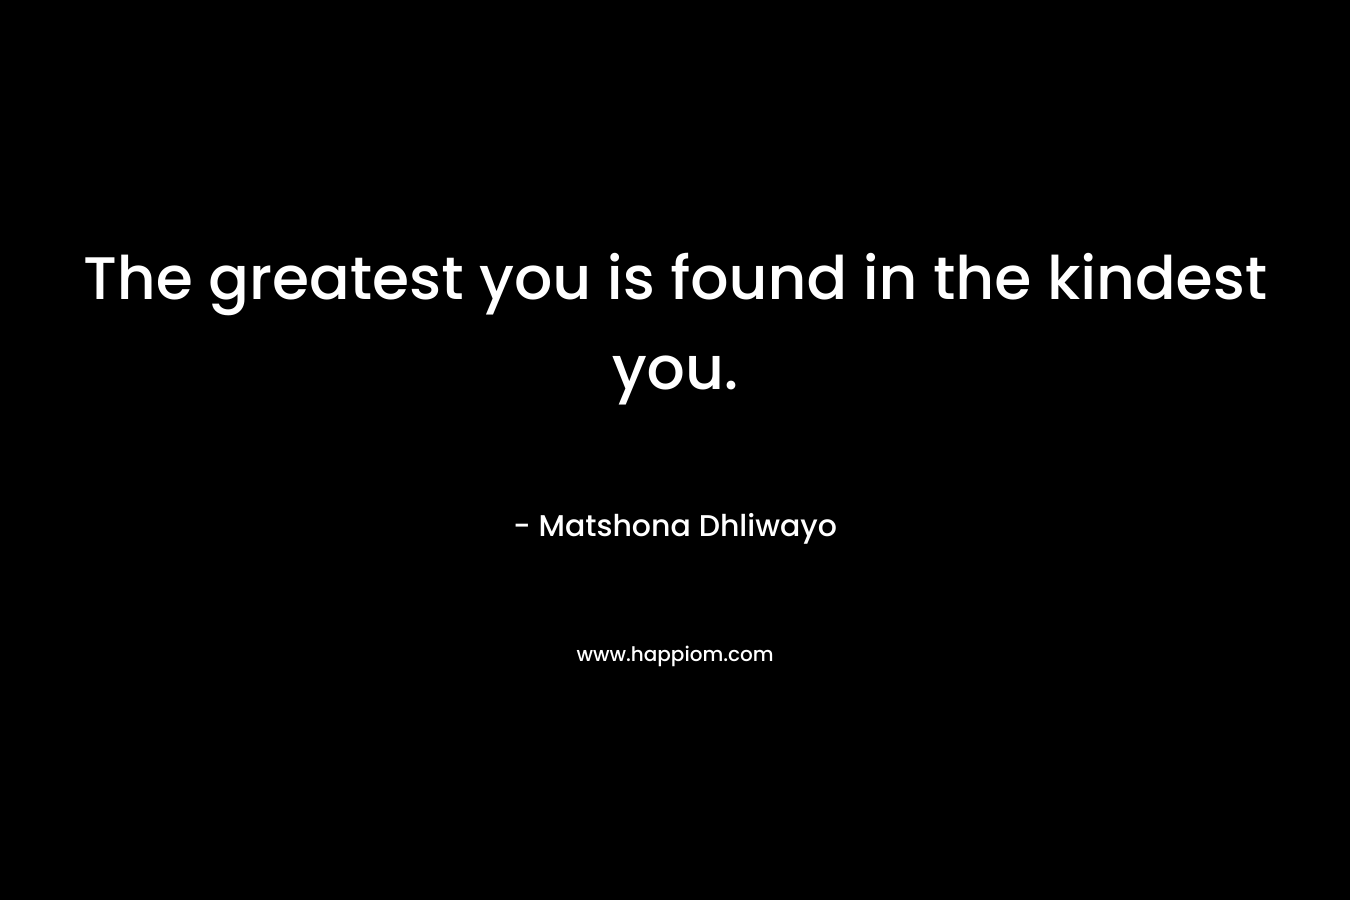 The greatest you is found in the kindest you. – Matshona Dhliwayo